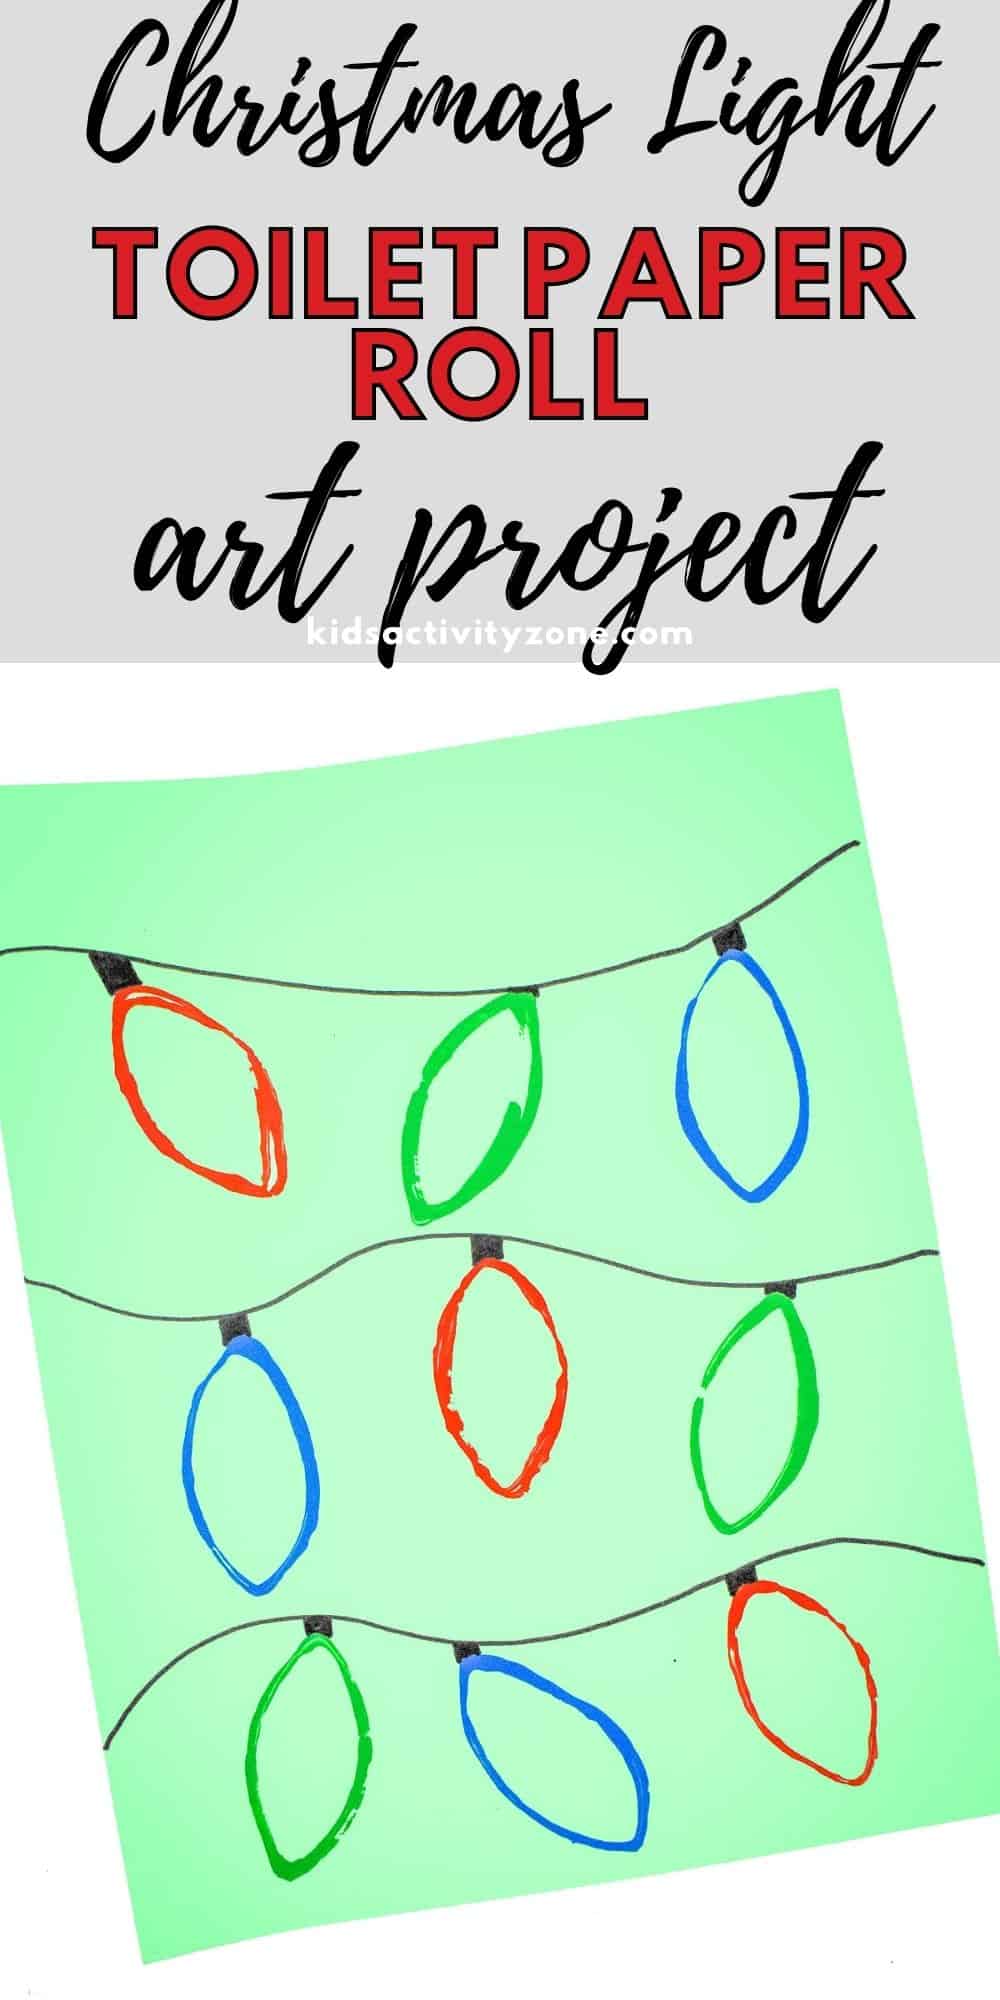 Christmas Lights Toilet Paper Roll Art is an easy craft that anyone can do at home. With minimal supplies and prep work it's stress free and perfect for the Christmas season. When your kids are begging to do a craft project don't dread it with this easy one!